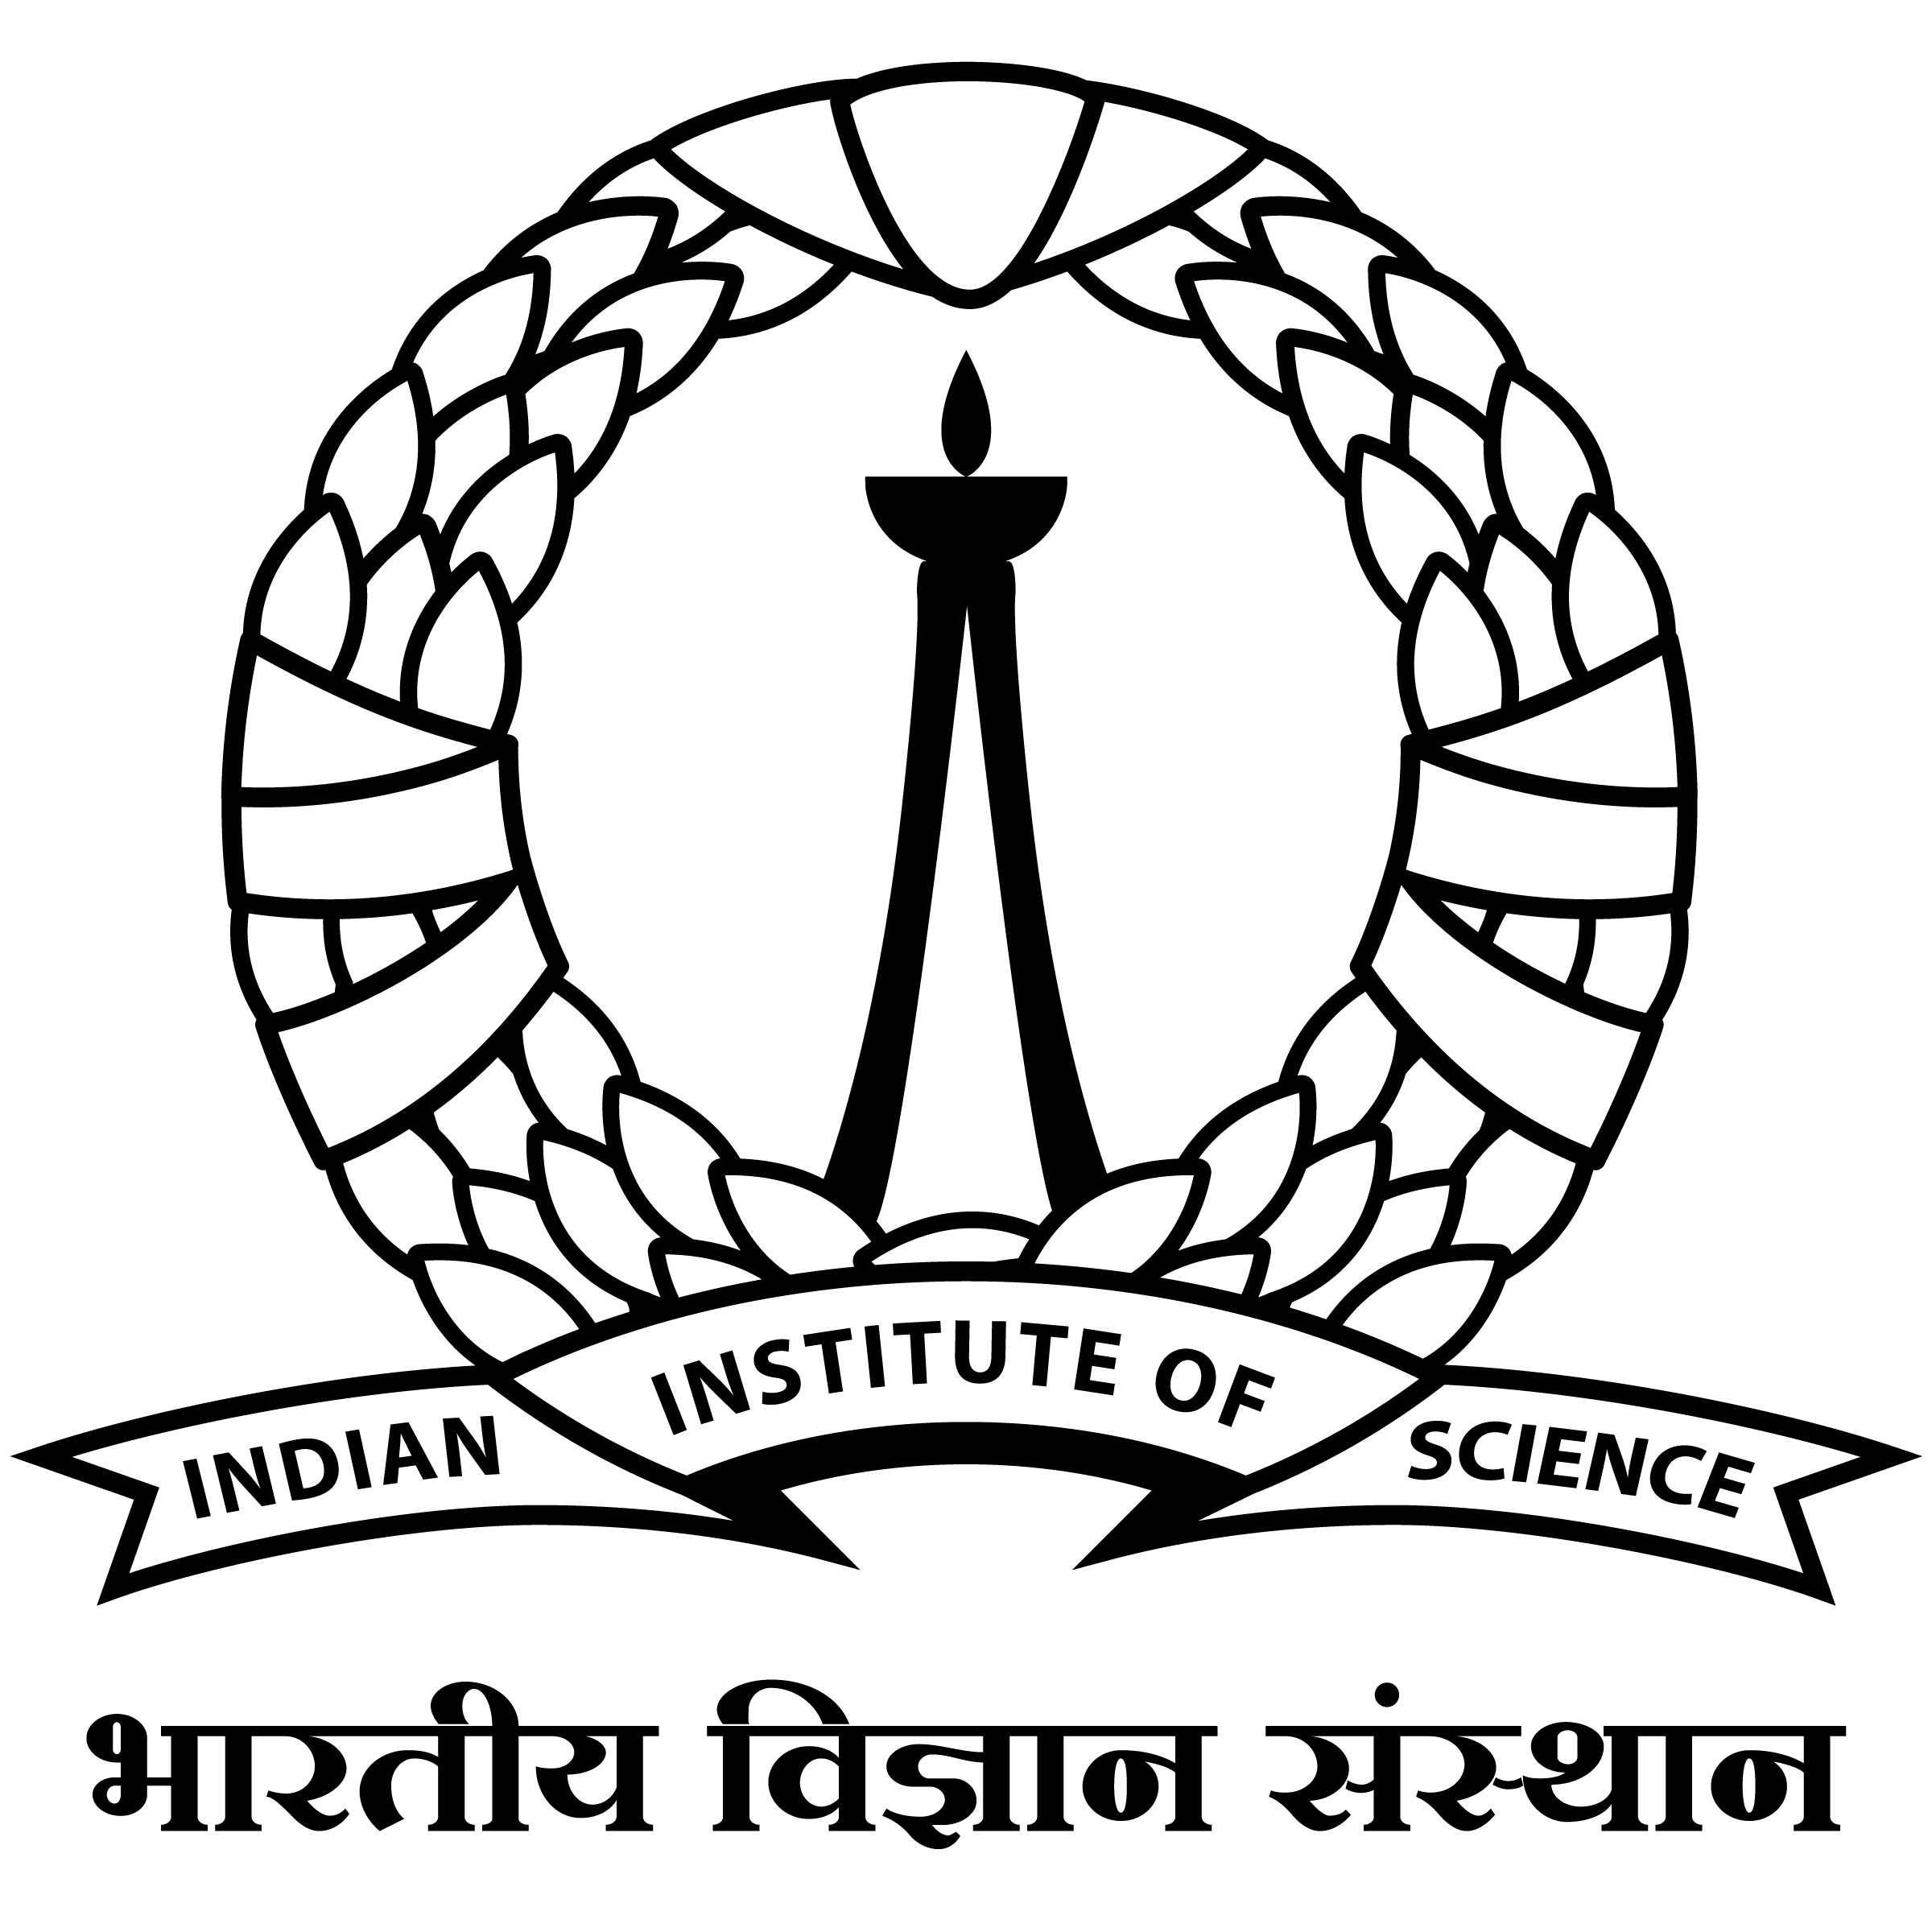 The Indian Institute of Science (IISc) Admissions 2022